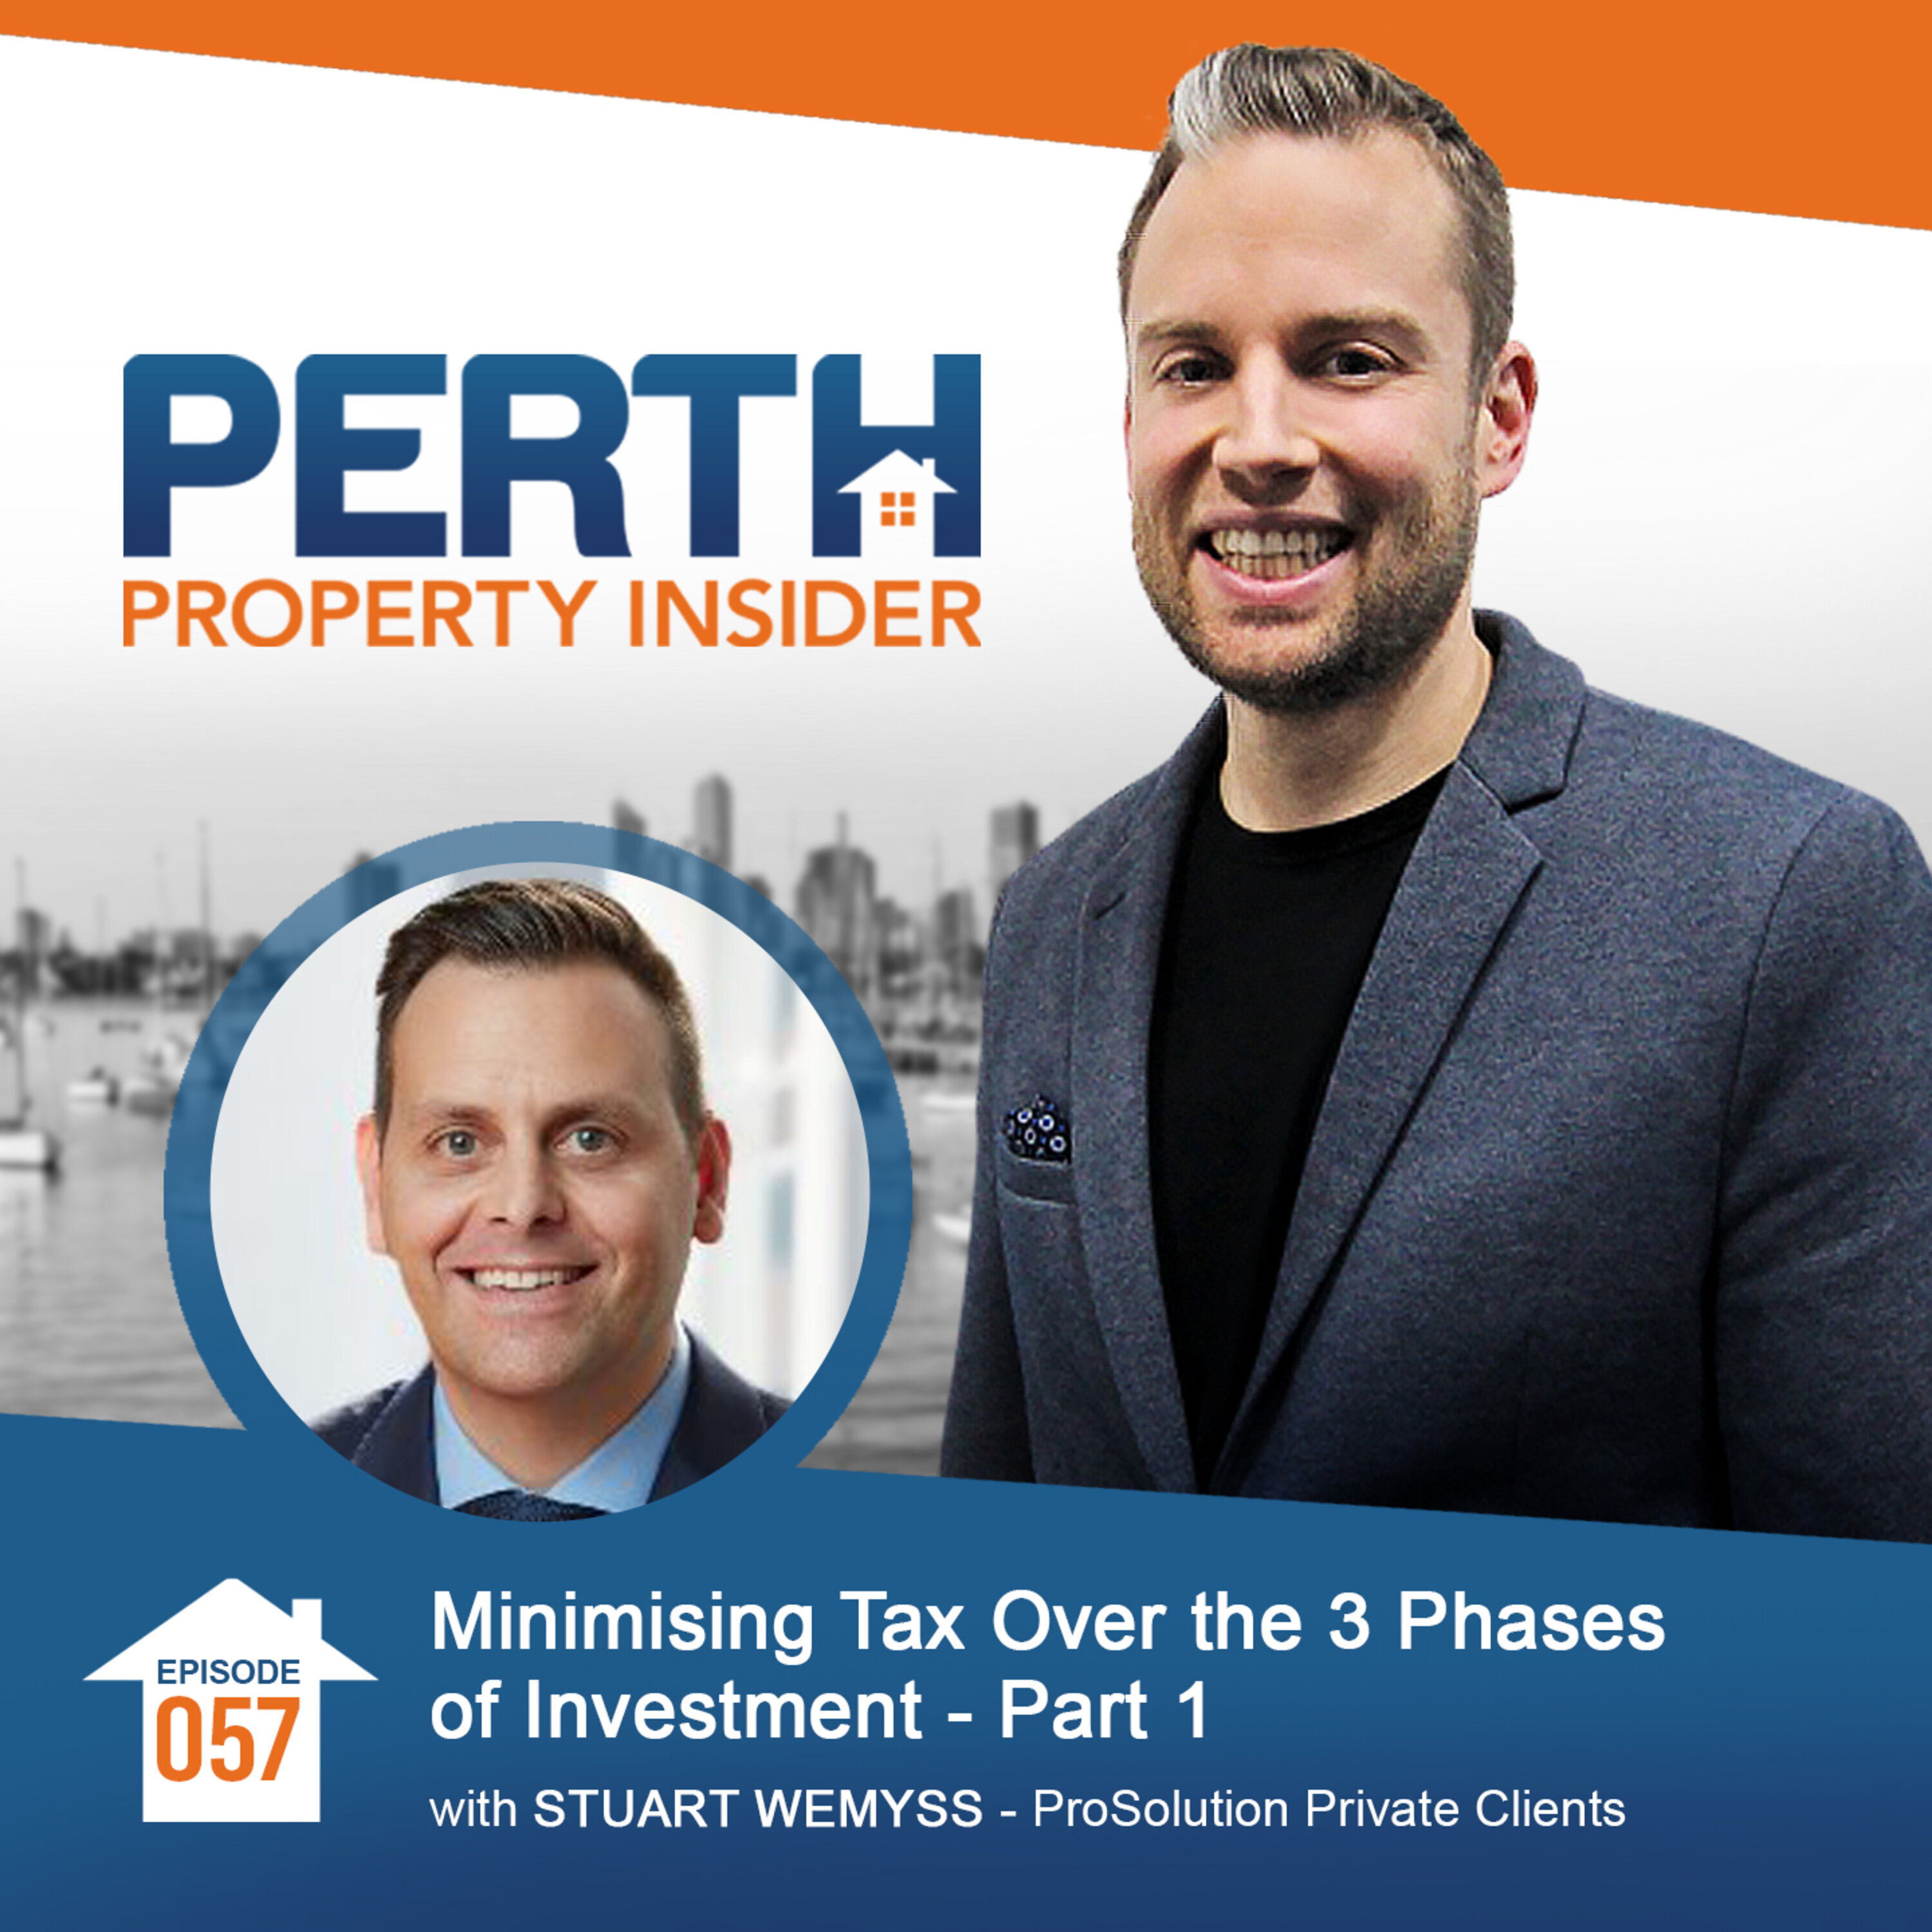 Minimising Tax Over the 3 Phases of Investment - Part 1